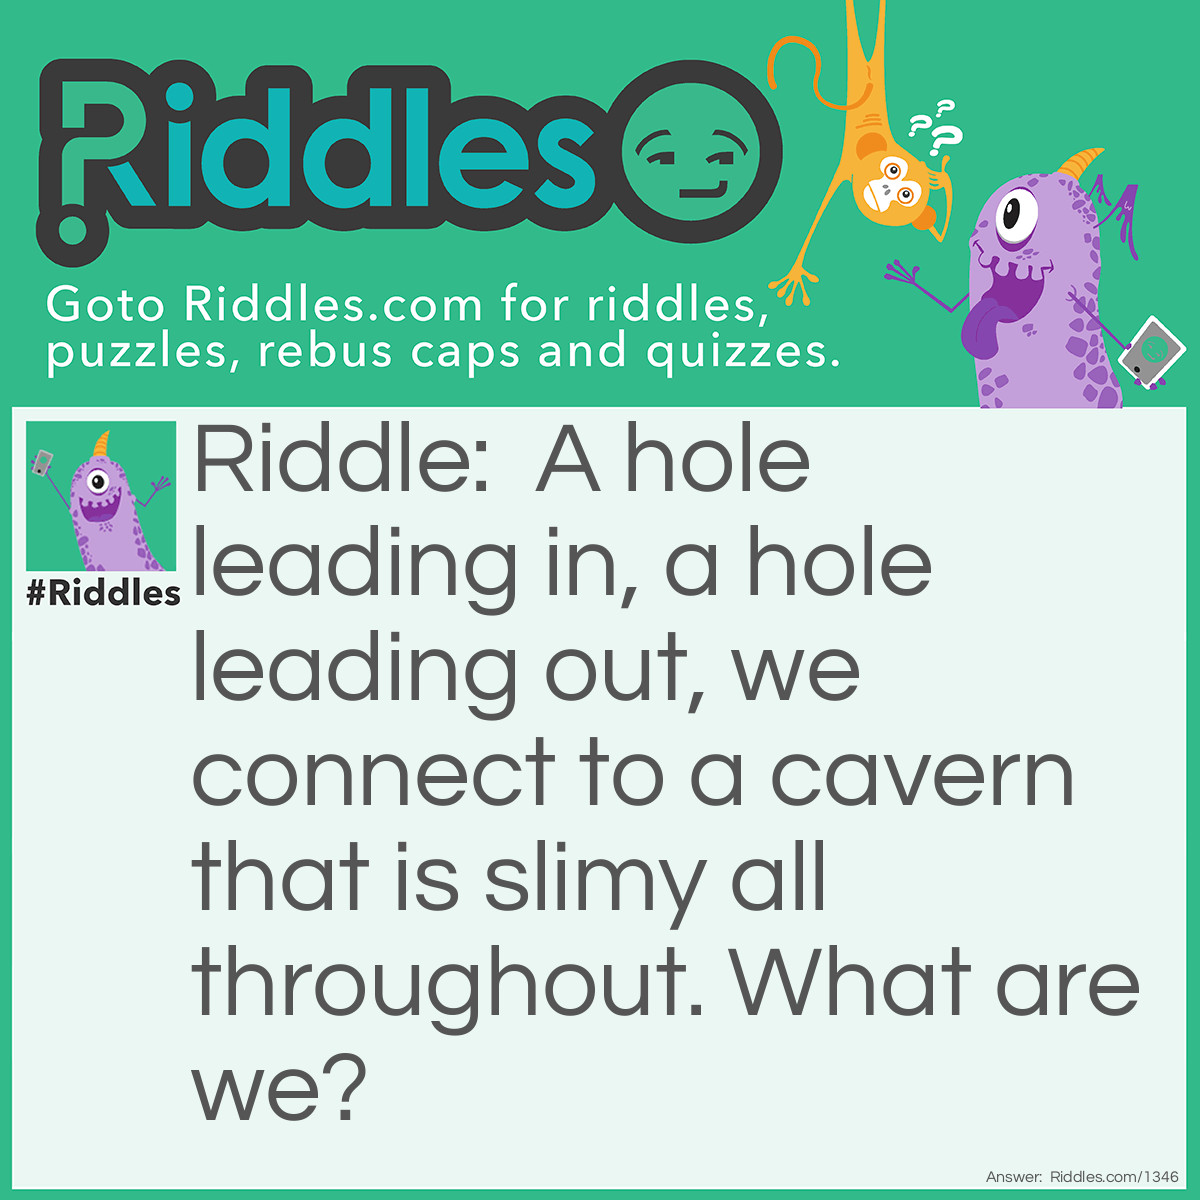 Riddle: A hole leading in, a hole leading out, we connect to a cavern that is slimy all throughout.
What are we? Answer: A nose.